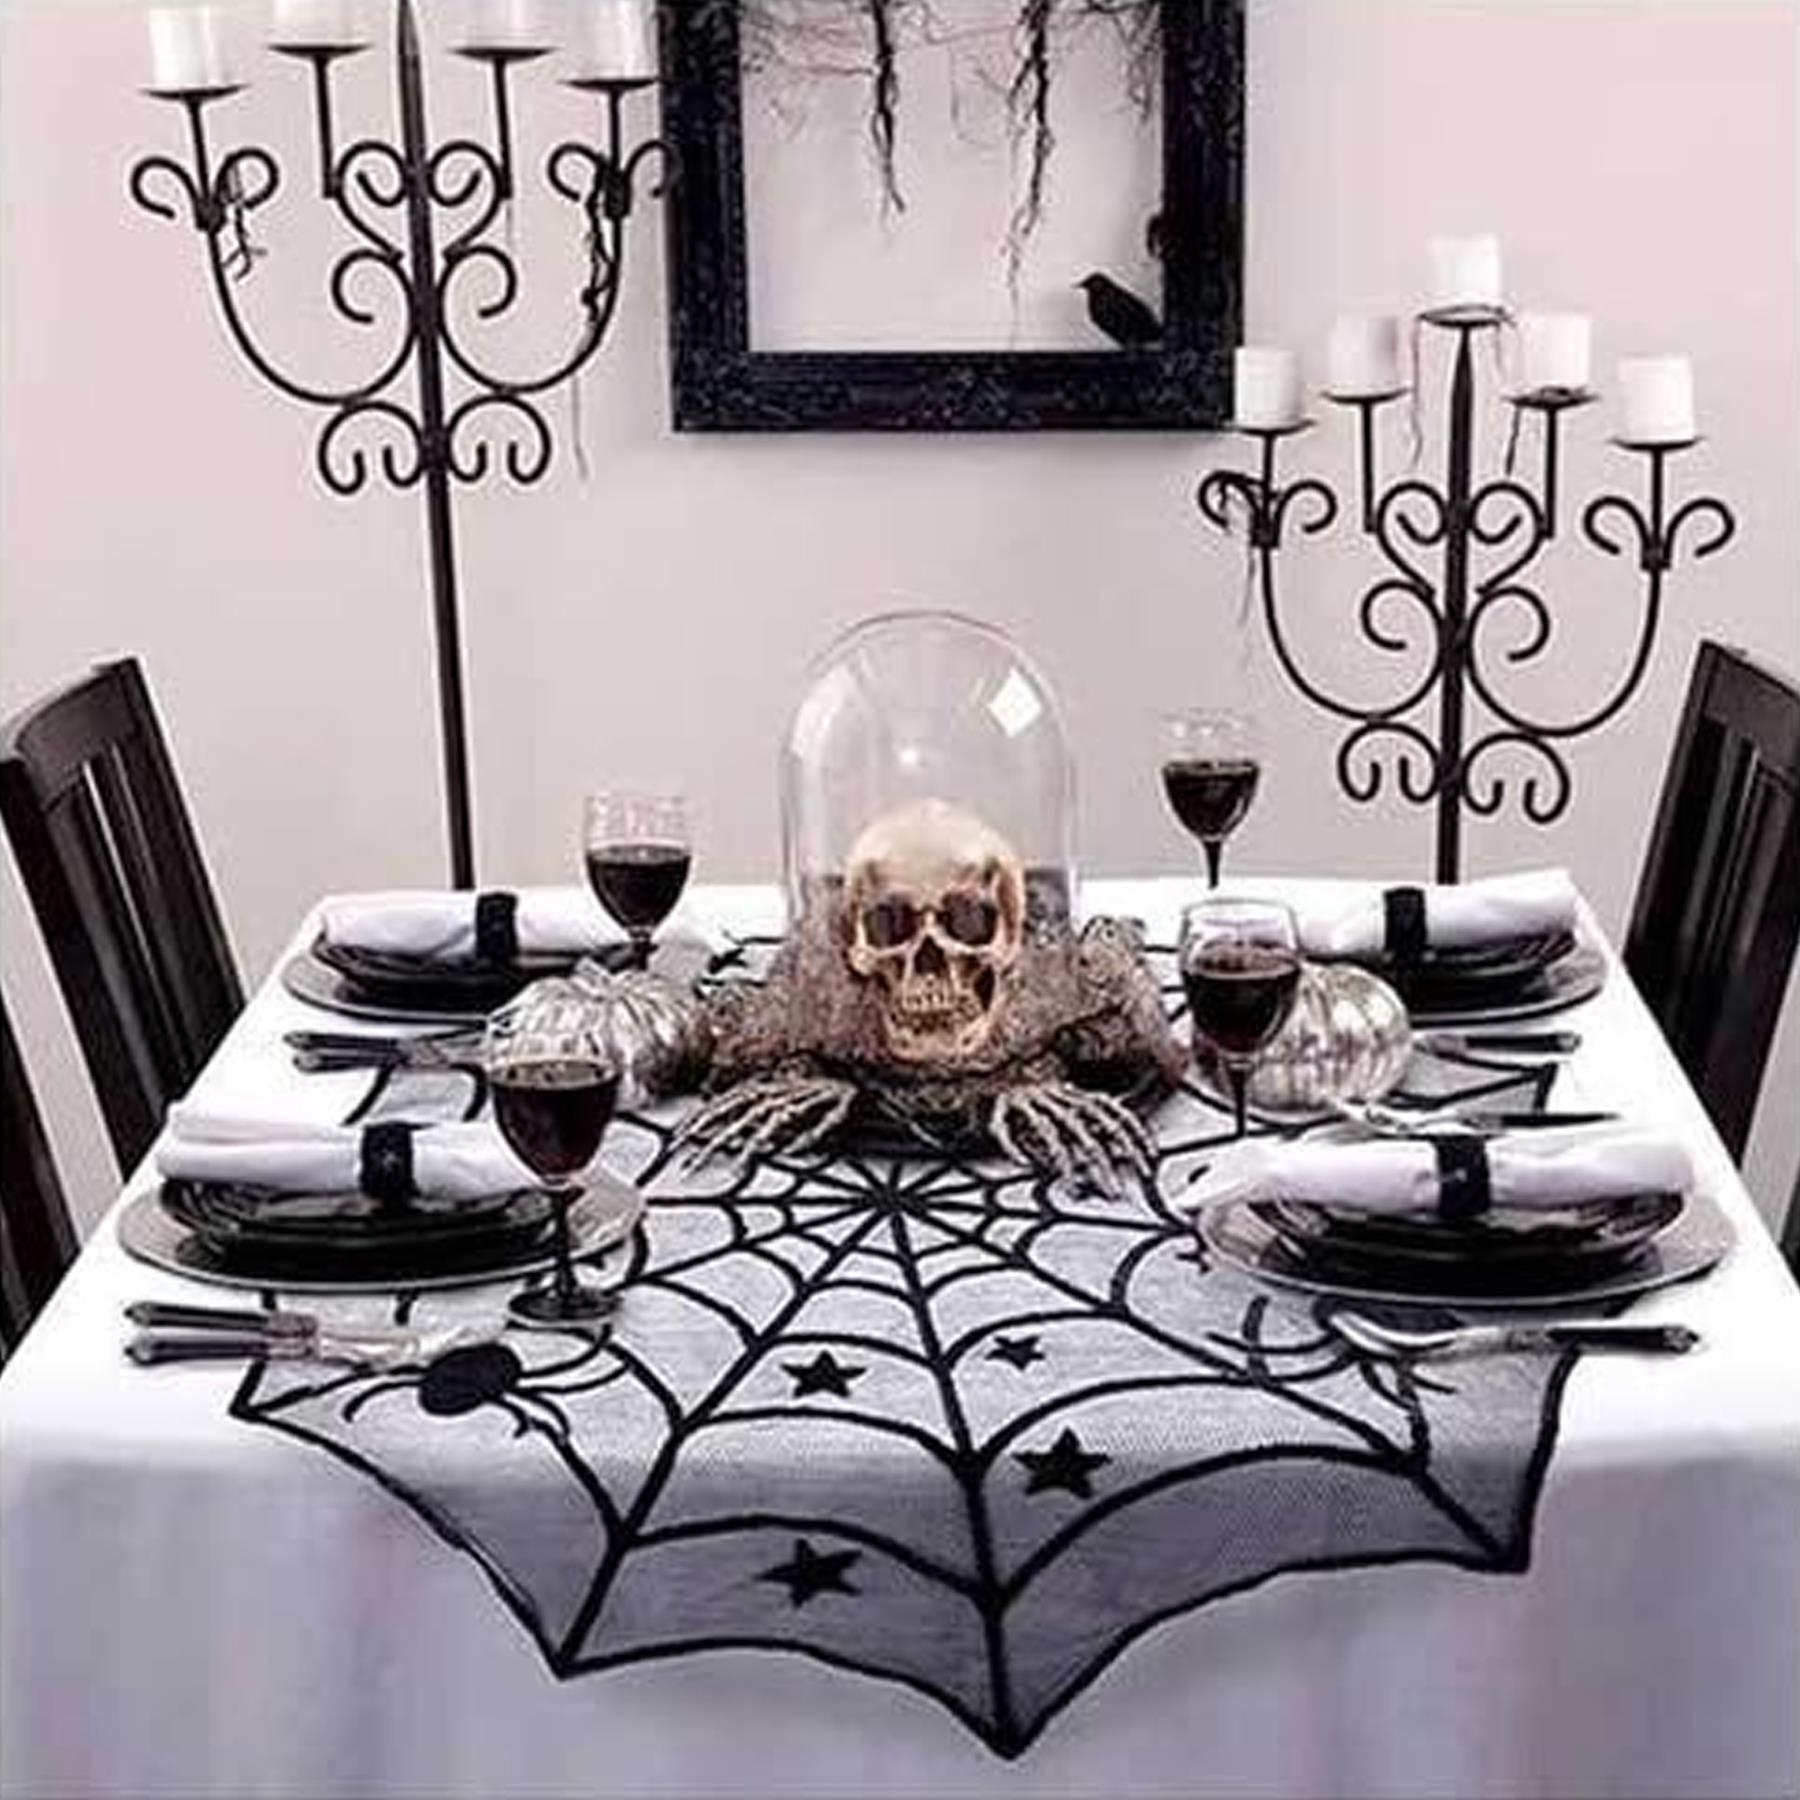 Halloween 100cm Spider Web Lace Tablecloth Black Round Topper Party Decoration